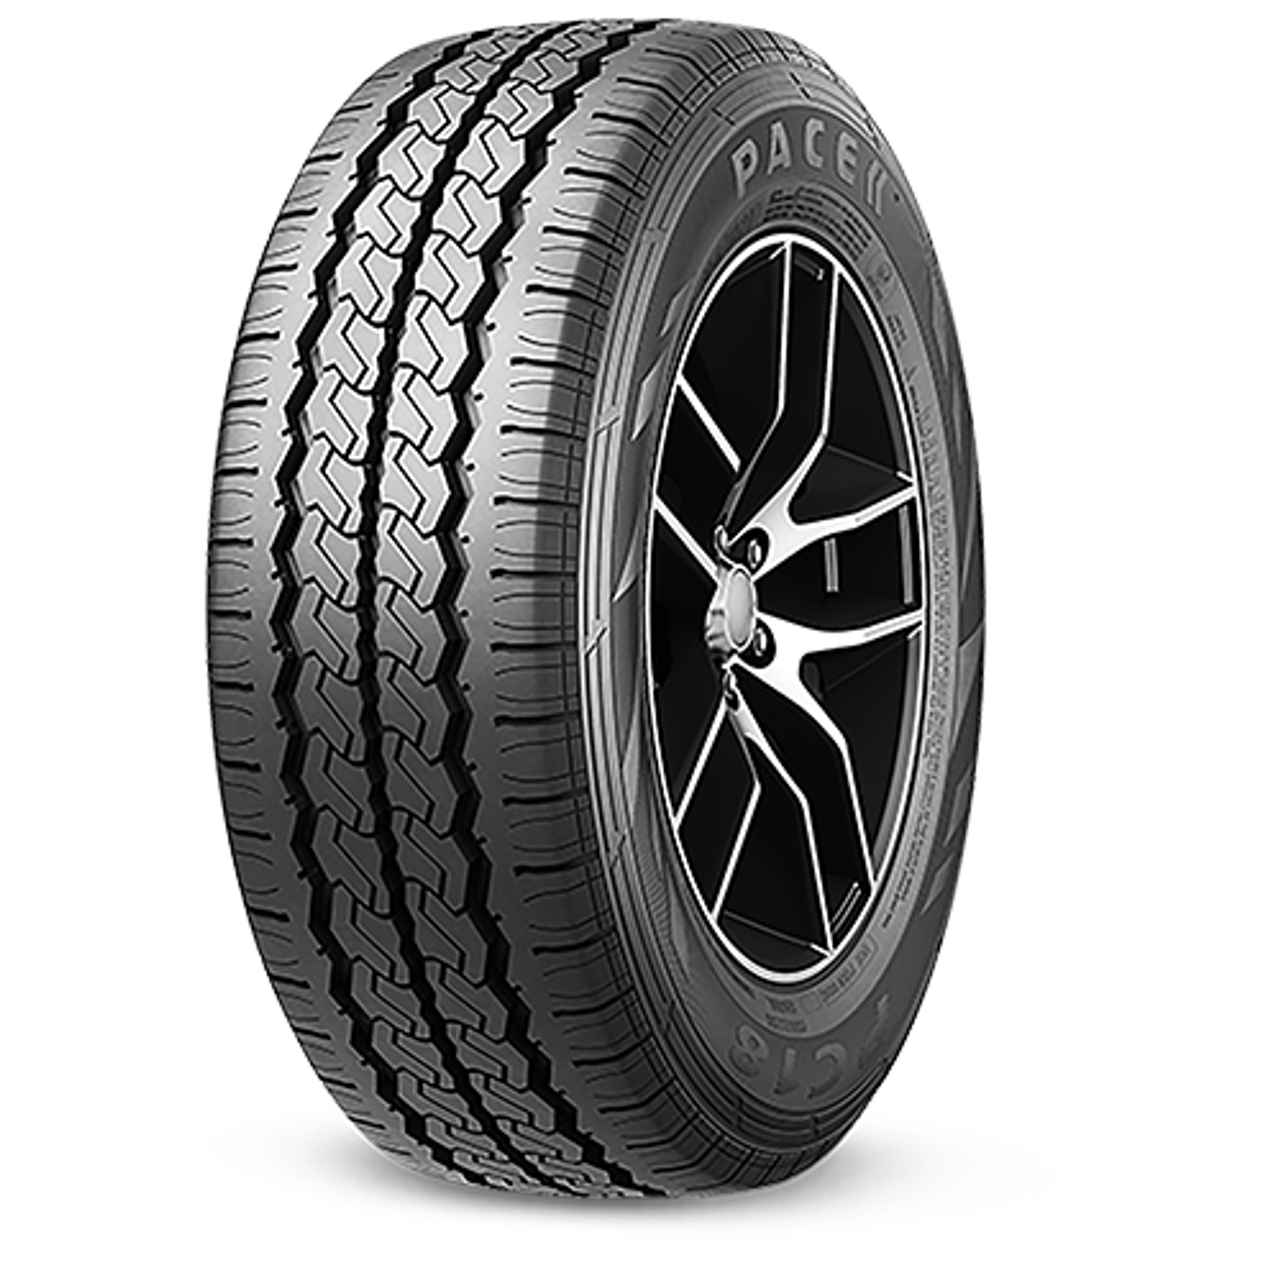 PACE PC18 195/70R15C 104S BSW